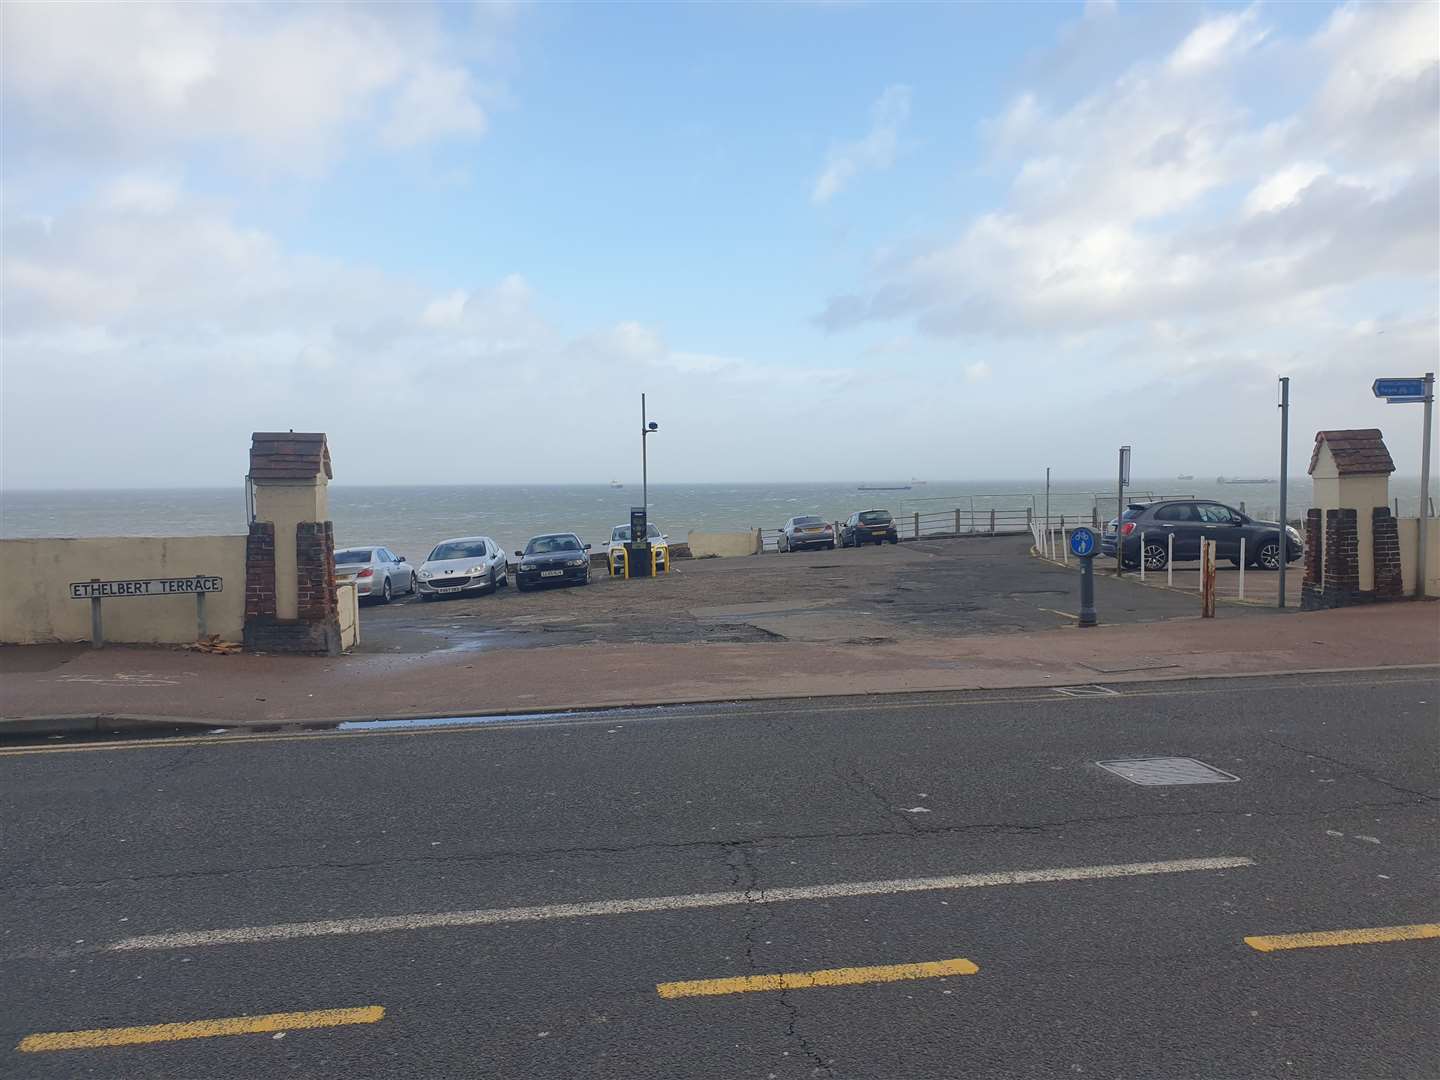 The Lido car park in Margate